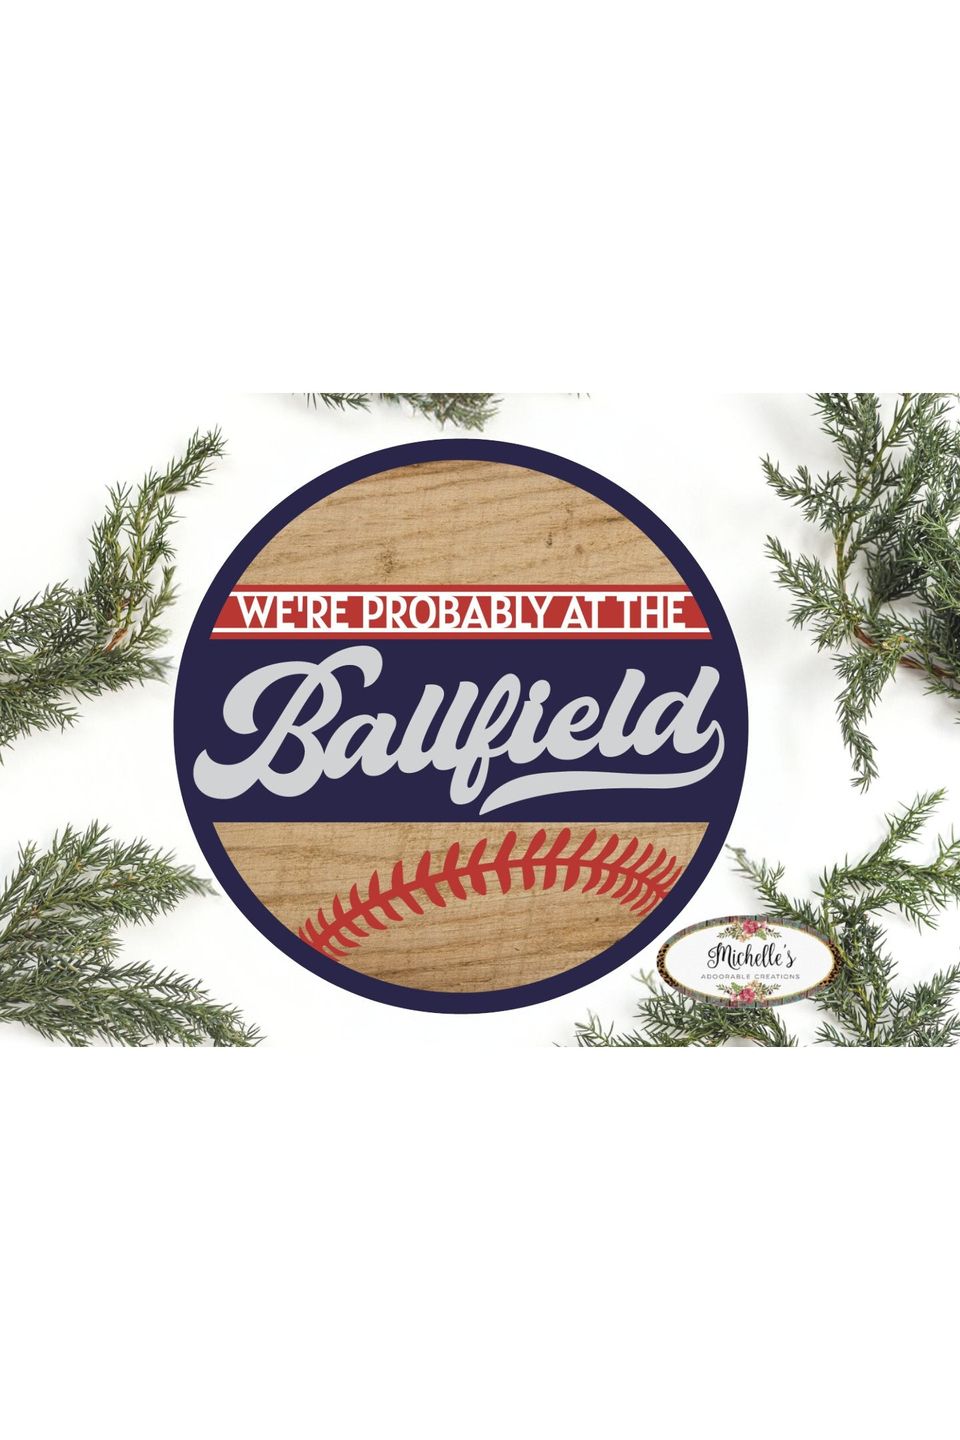 Shop For Probably at The Ballfield Baseball Sign - Wreath Enhancement